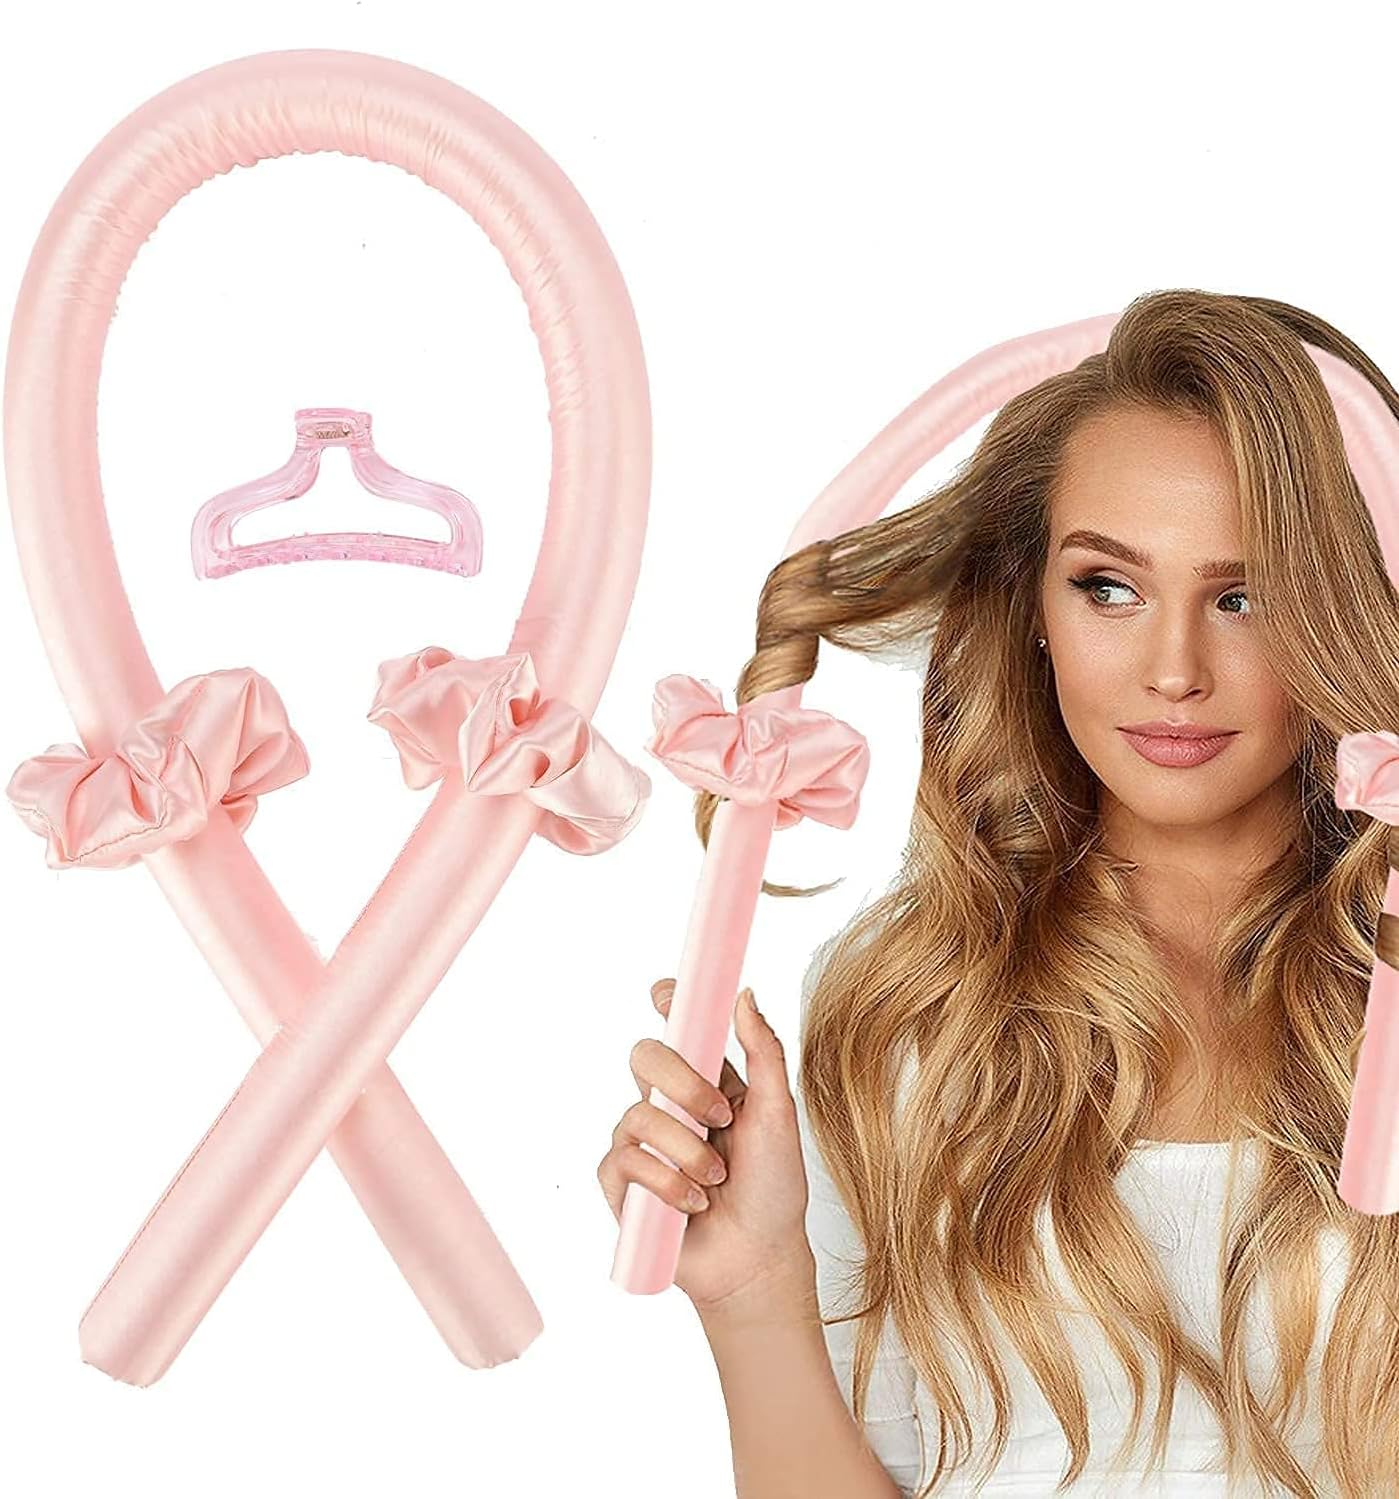 Heatless Curling Rod Headband,No Heat Wave Hair Curlers Styling Tools for Long Medium Hair Make Soft And Shiny (Pink)